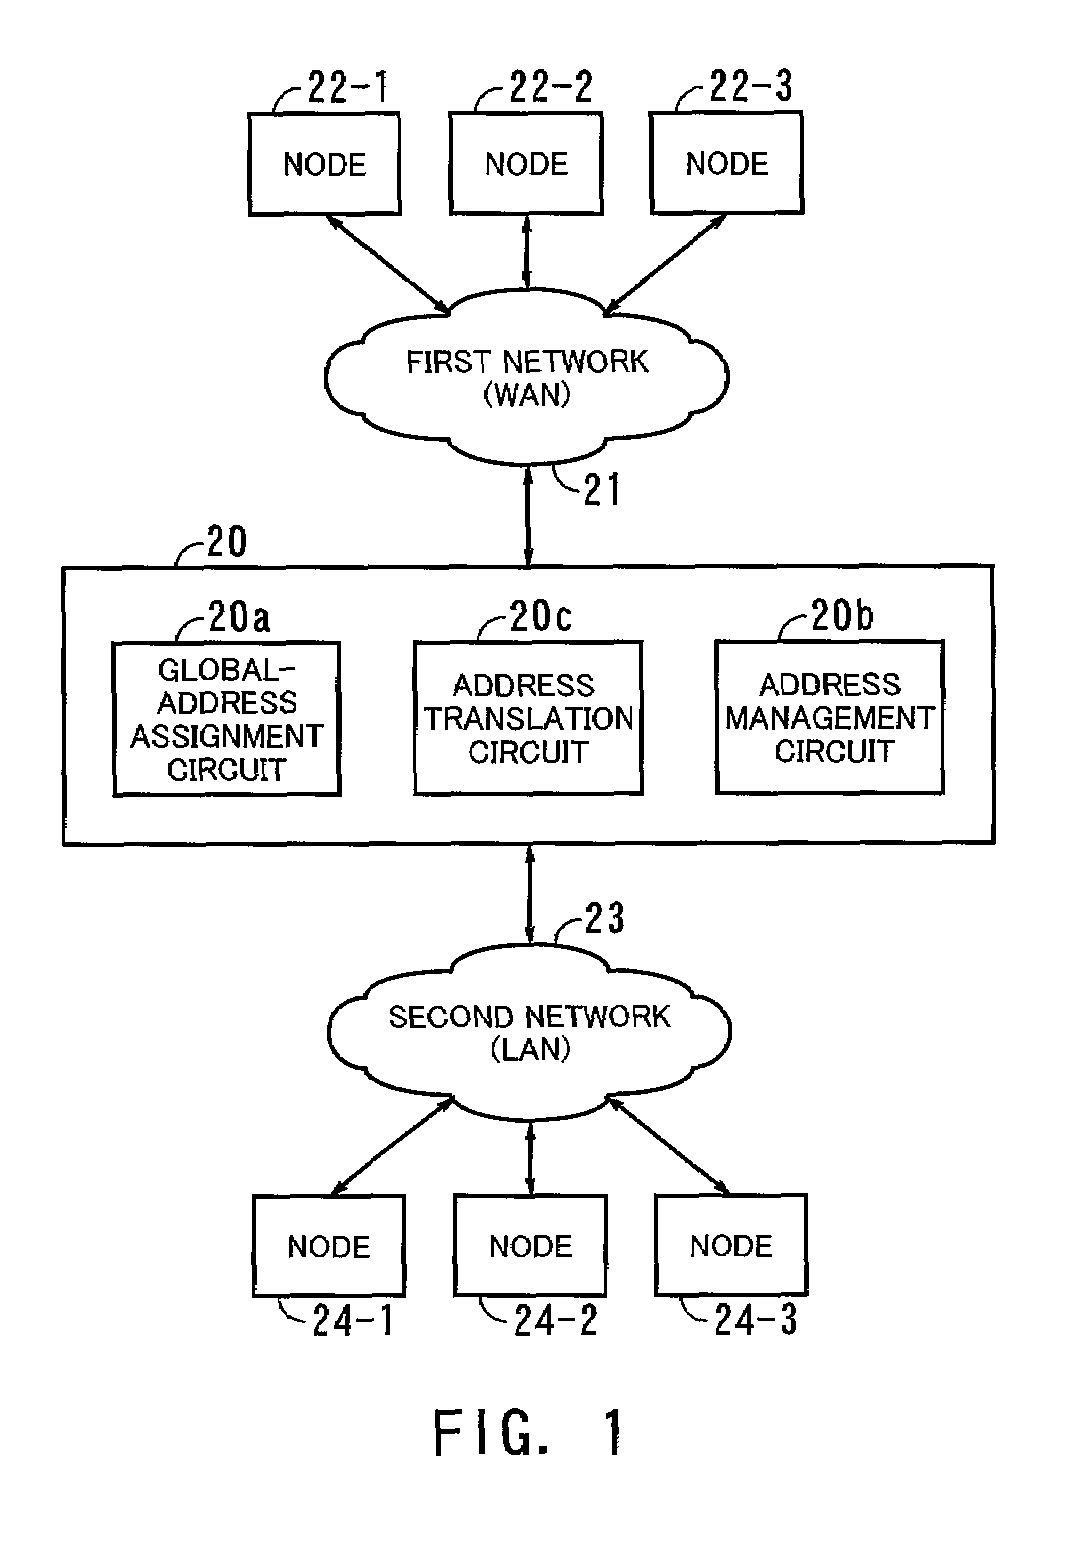 Packet transfer apparatus having network address translation circuit which enables high-speed address translation during packet reception processing